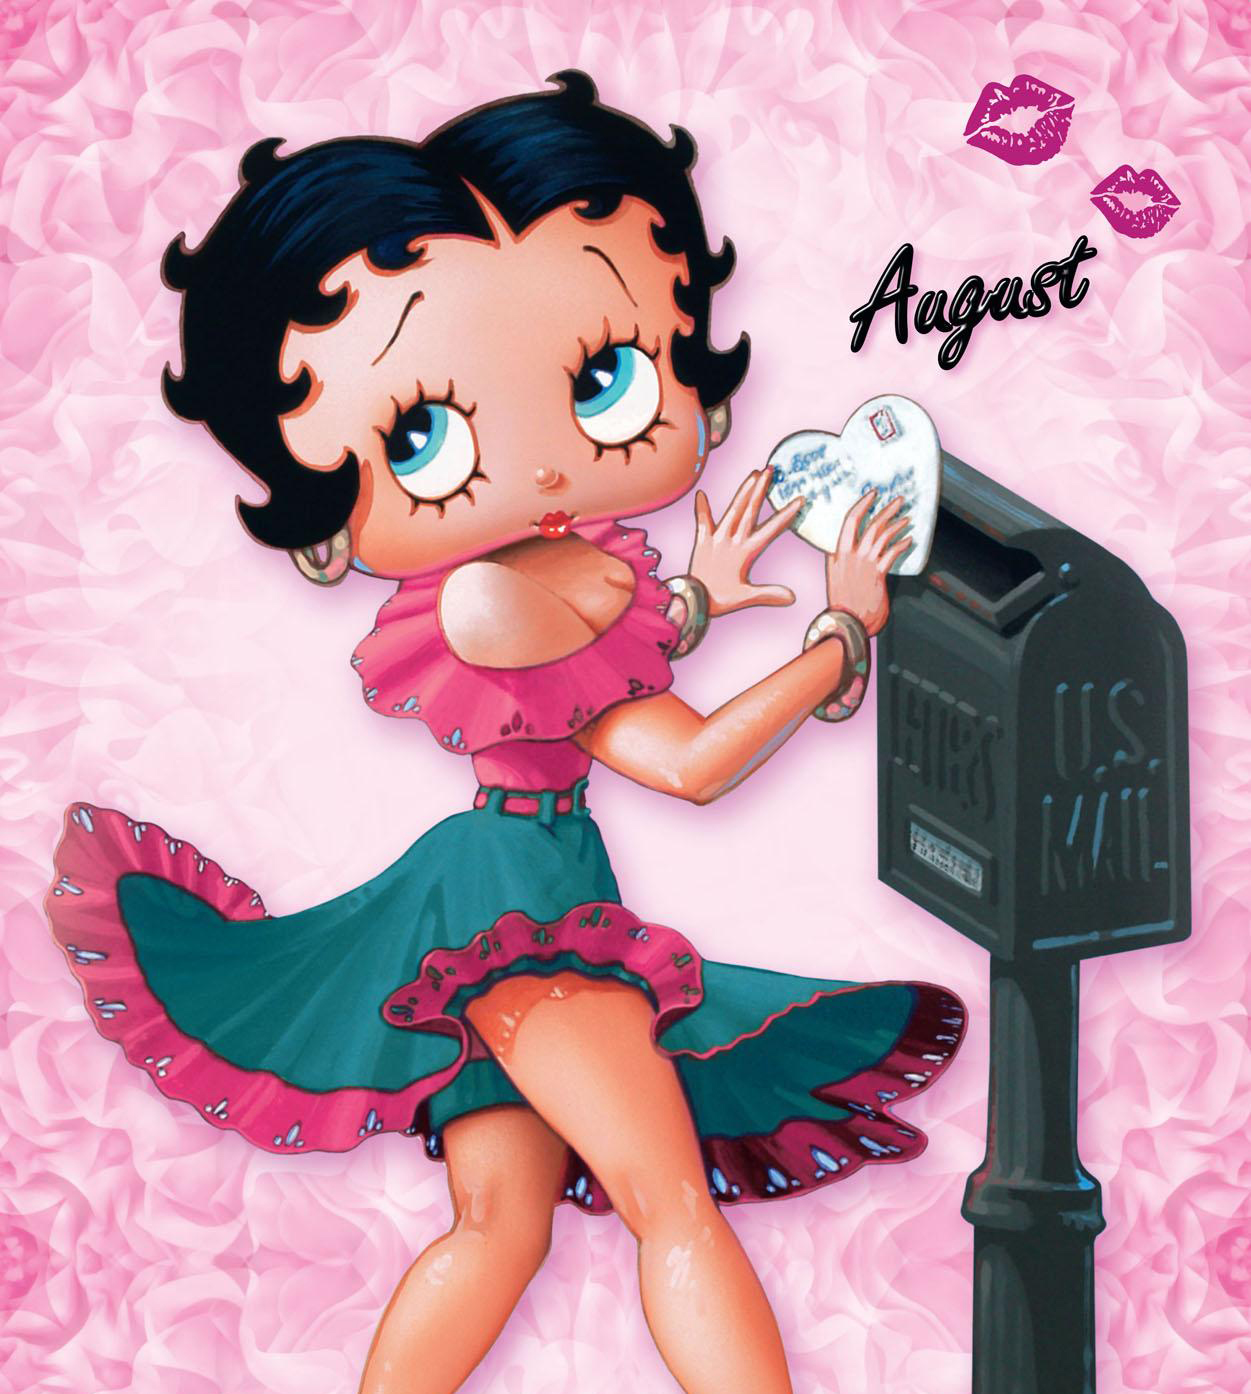 Free Download Picture Betty Boop Calender Image Betty Boop Calender Wallpaper 1251x1394 For Your Desktop Mobile Tablet Explore 76 Black Betty Boop Wallpaper Betty Boop Desktop Wallpaper Betty Boop